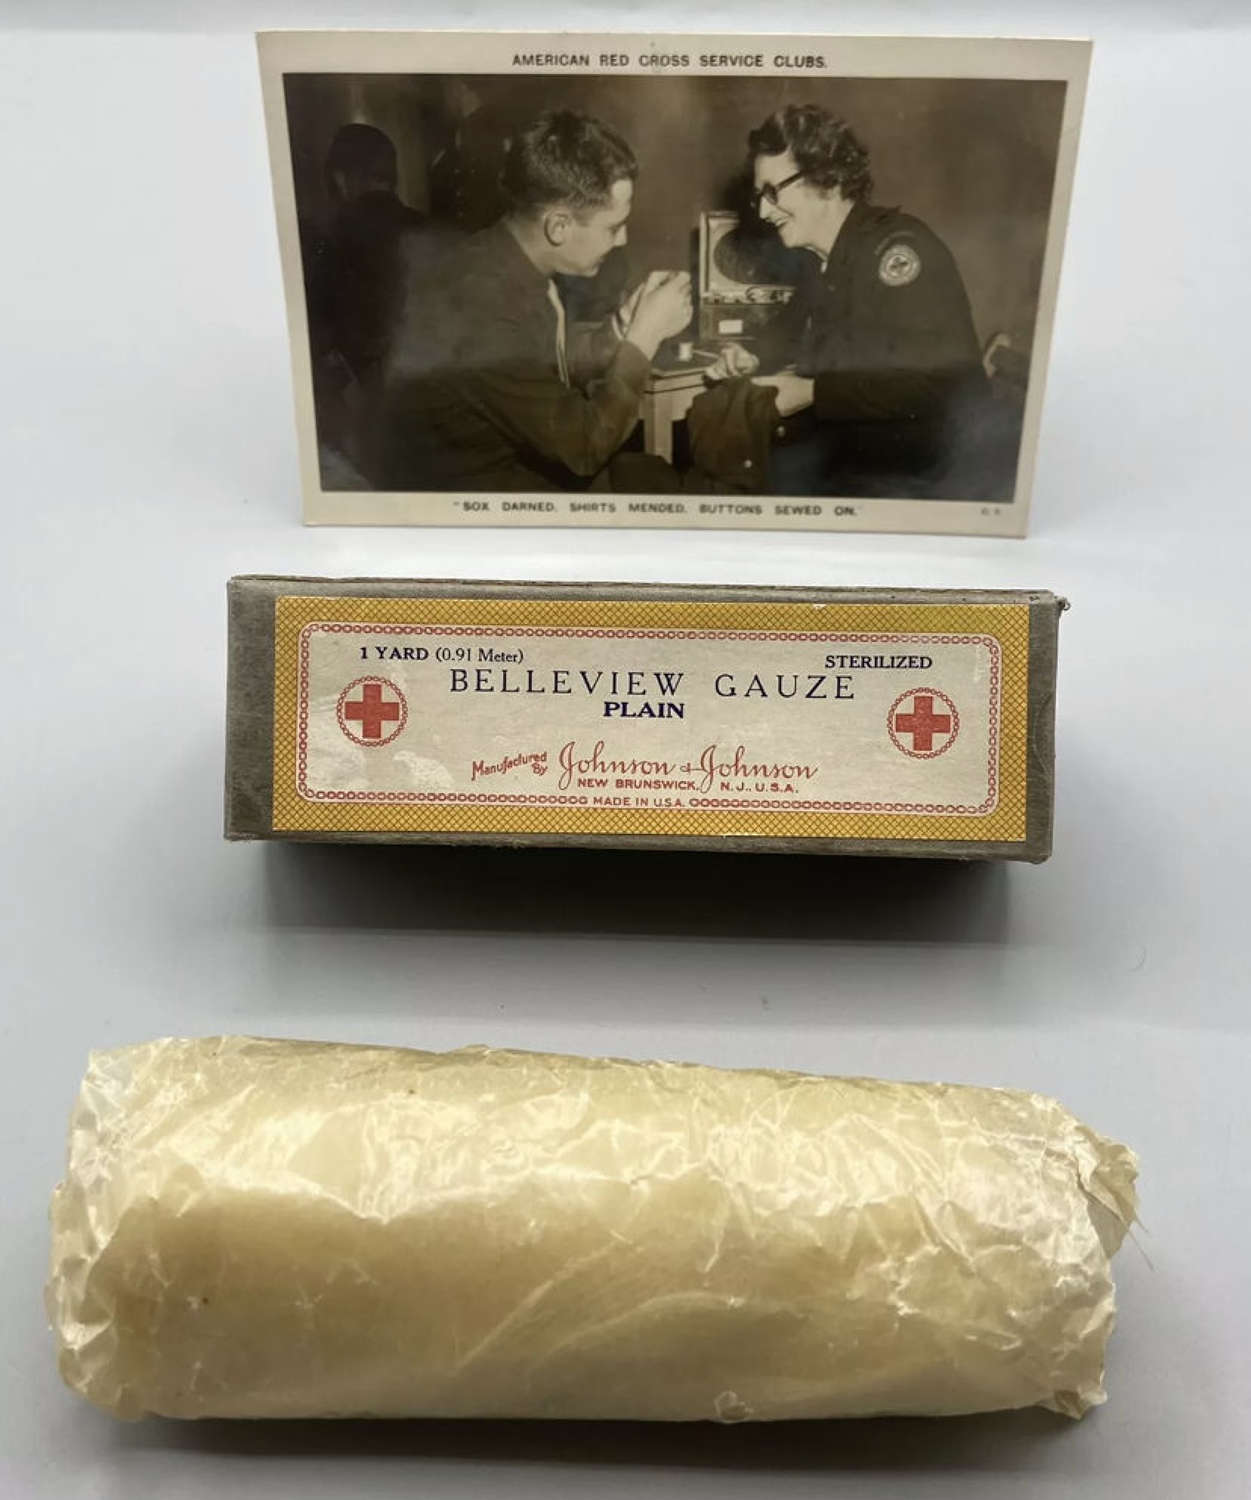 WW2 United States Red Cross Service Postcard And Belleview Gauze